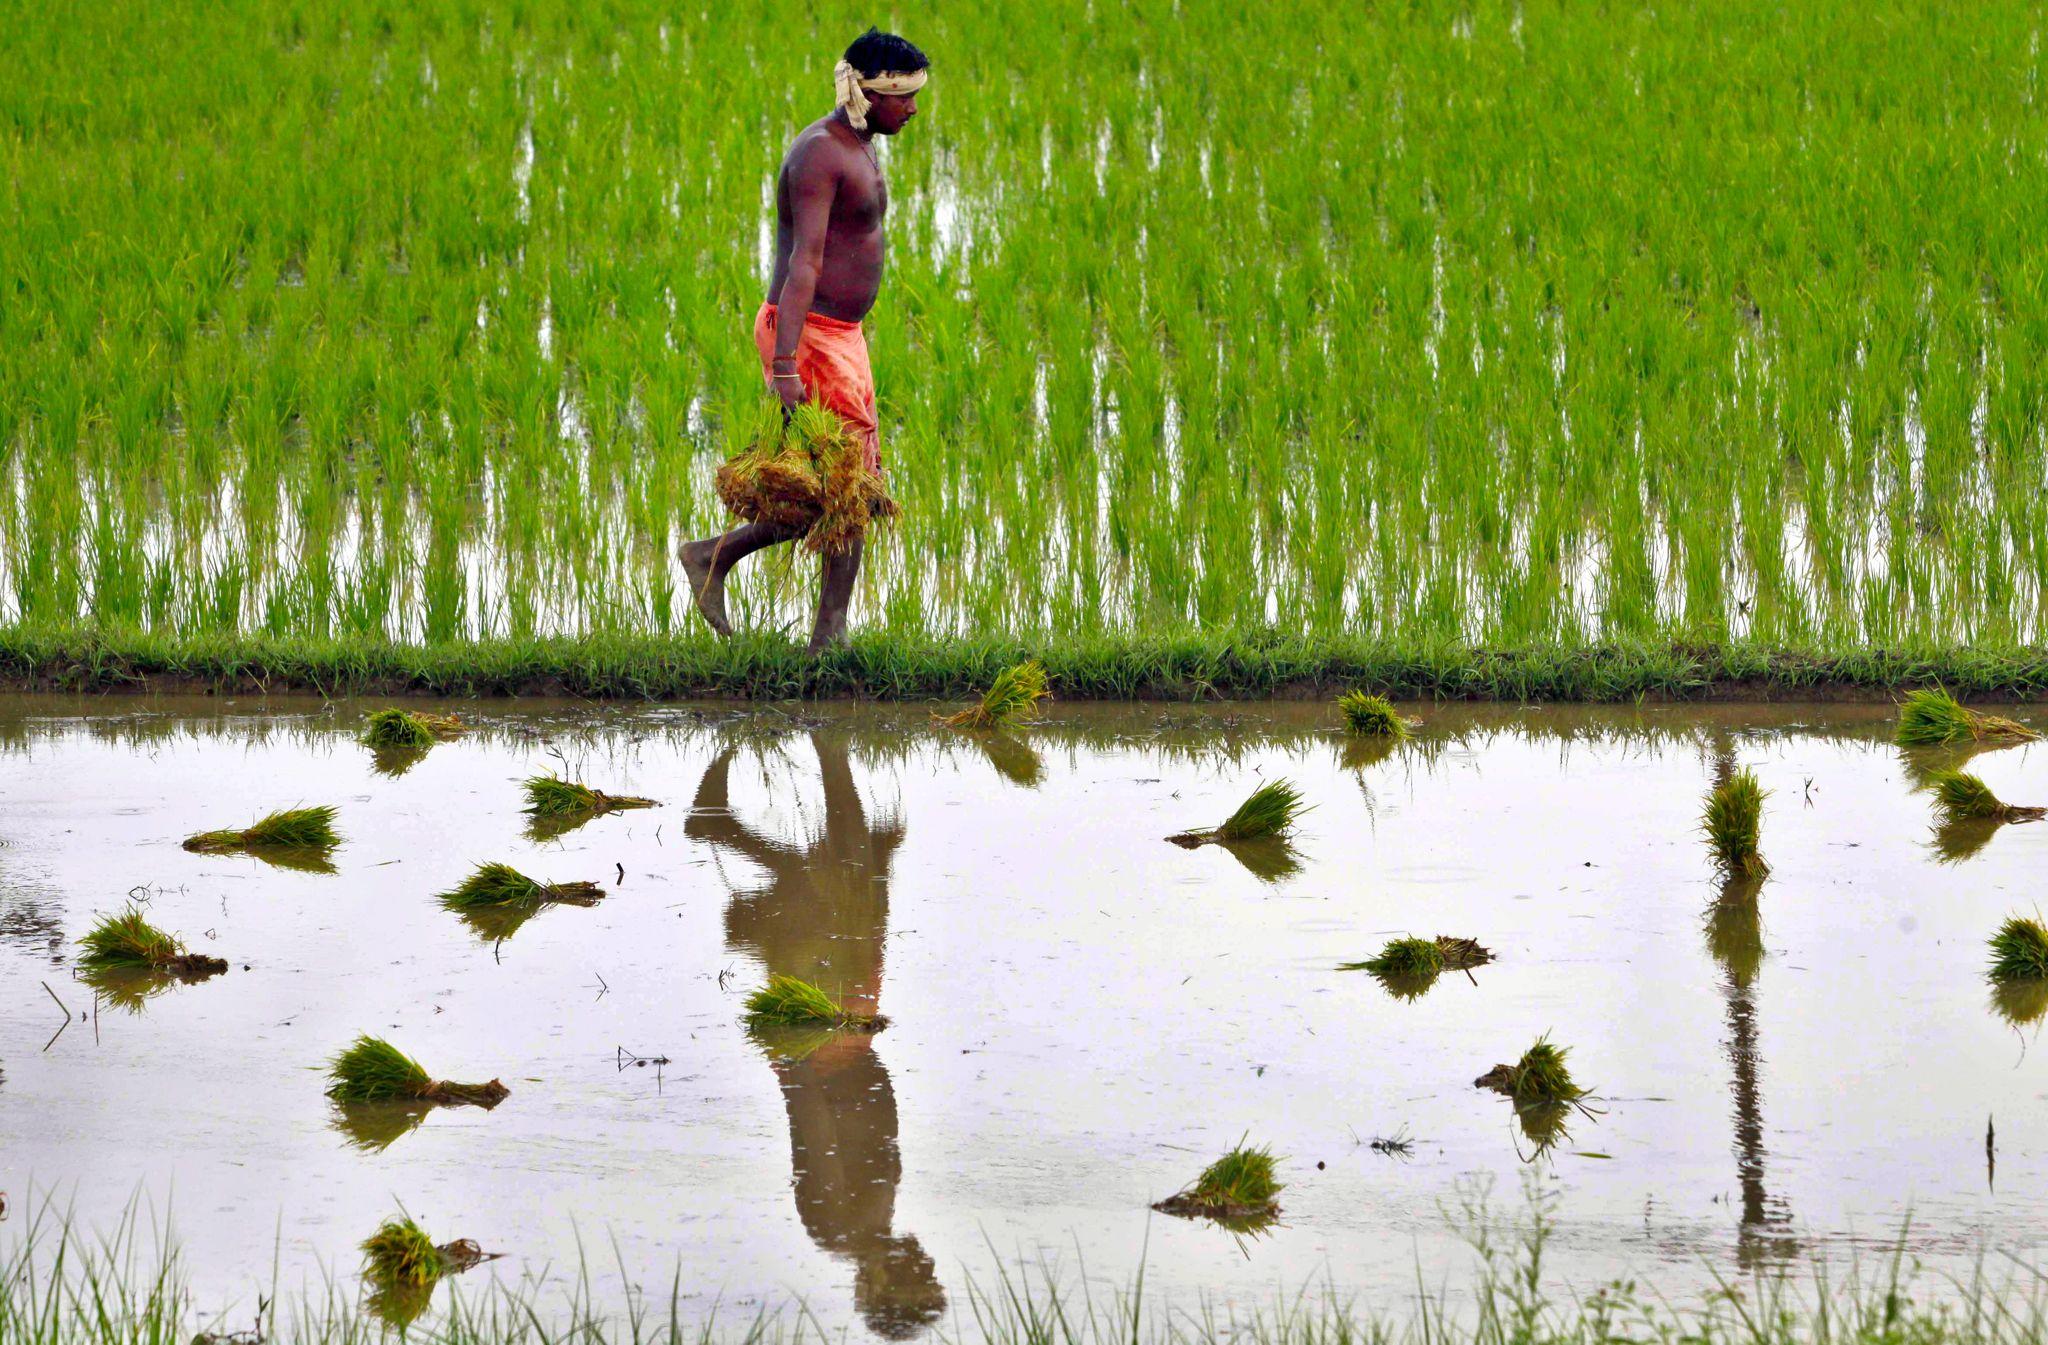 Report challenges 'myths' about Indian agriculture